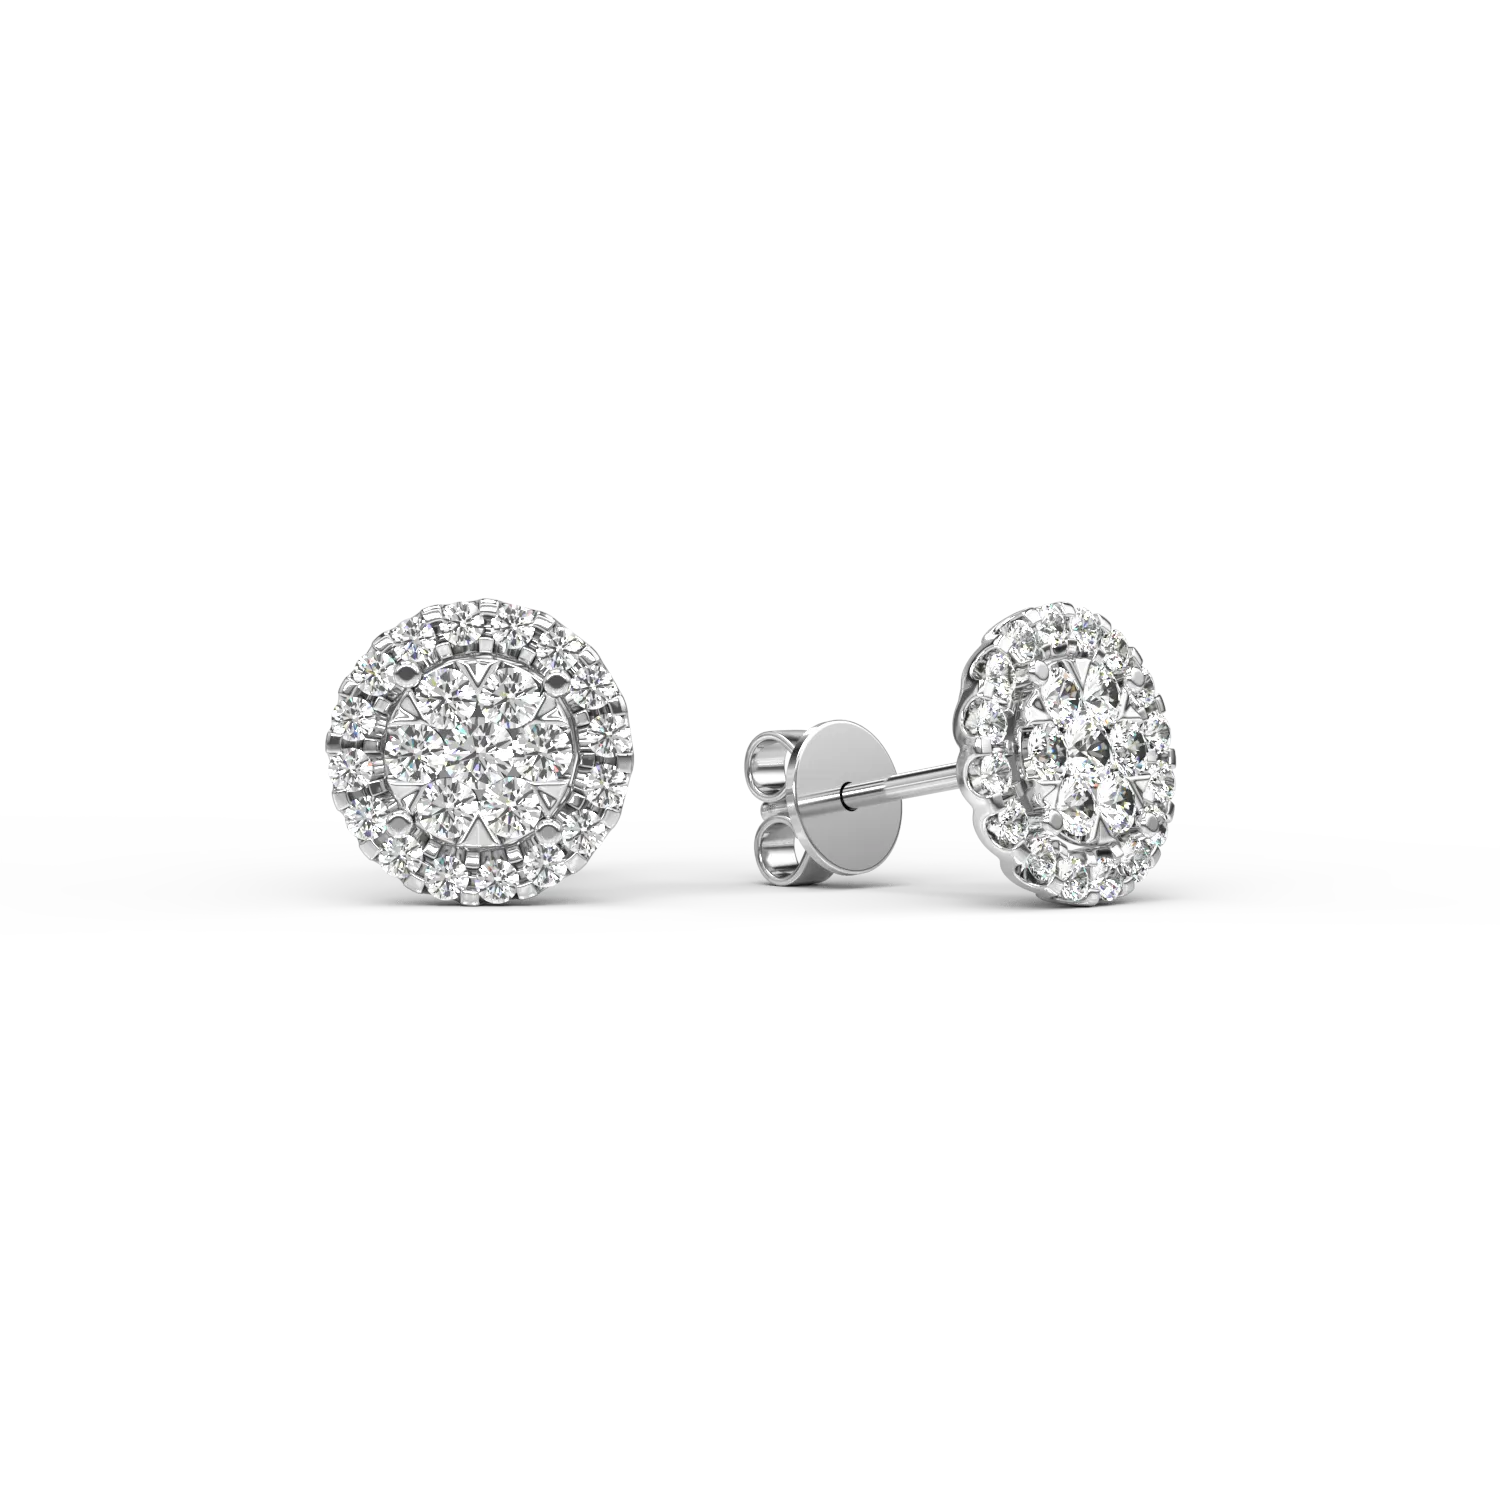 18K white gold earrings with 1.006ct diamonds